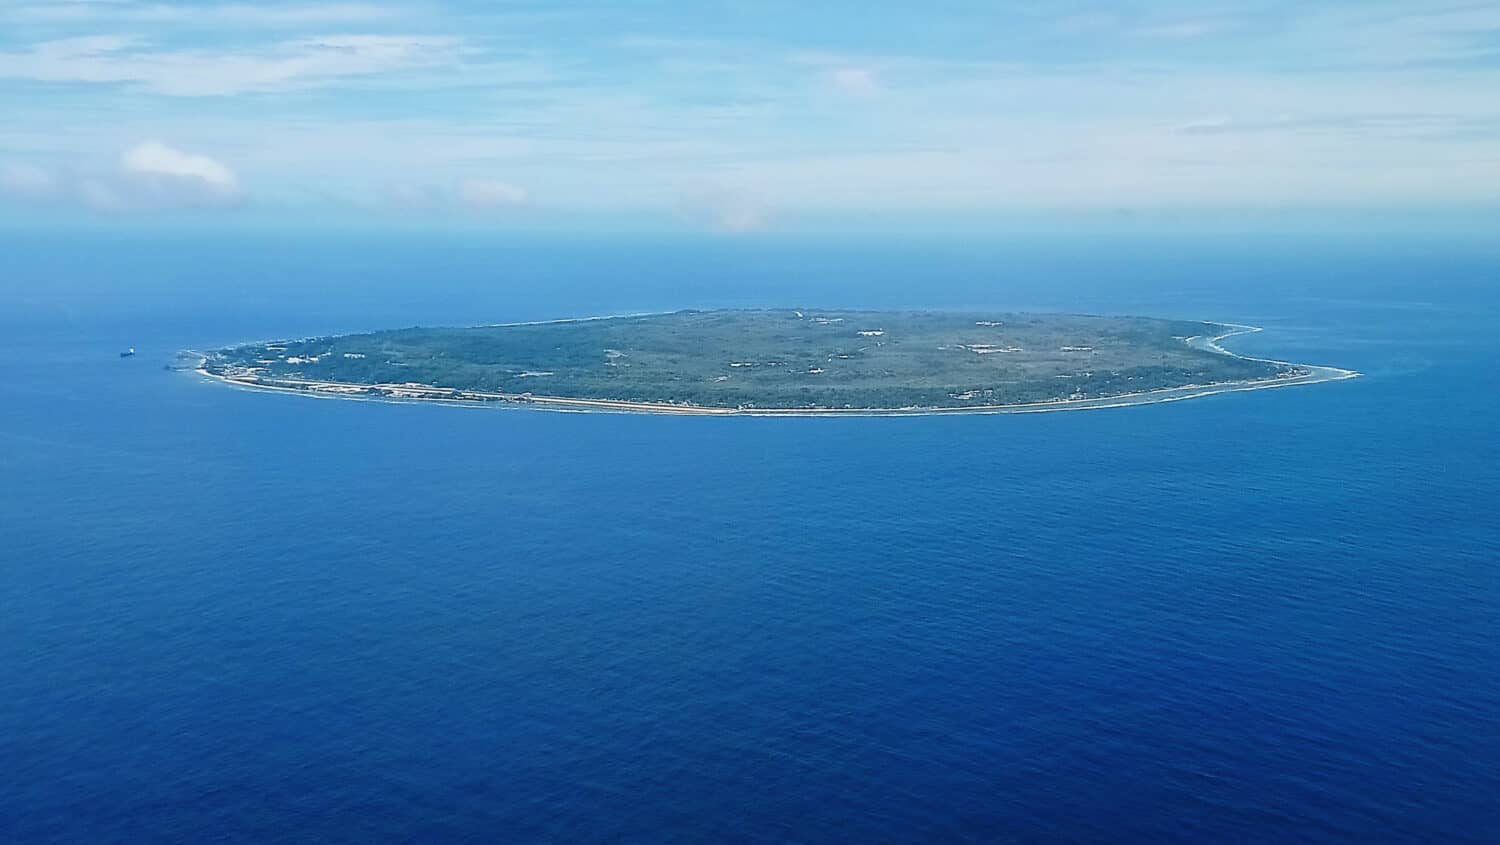 Nauru - 3rd smallest country in the world, aerial view